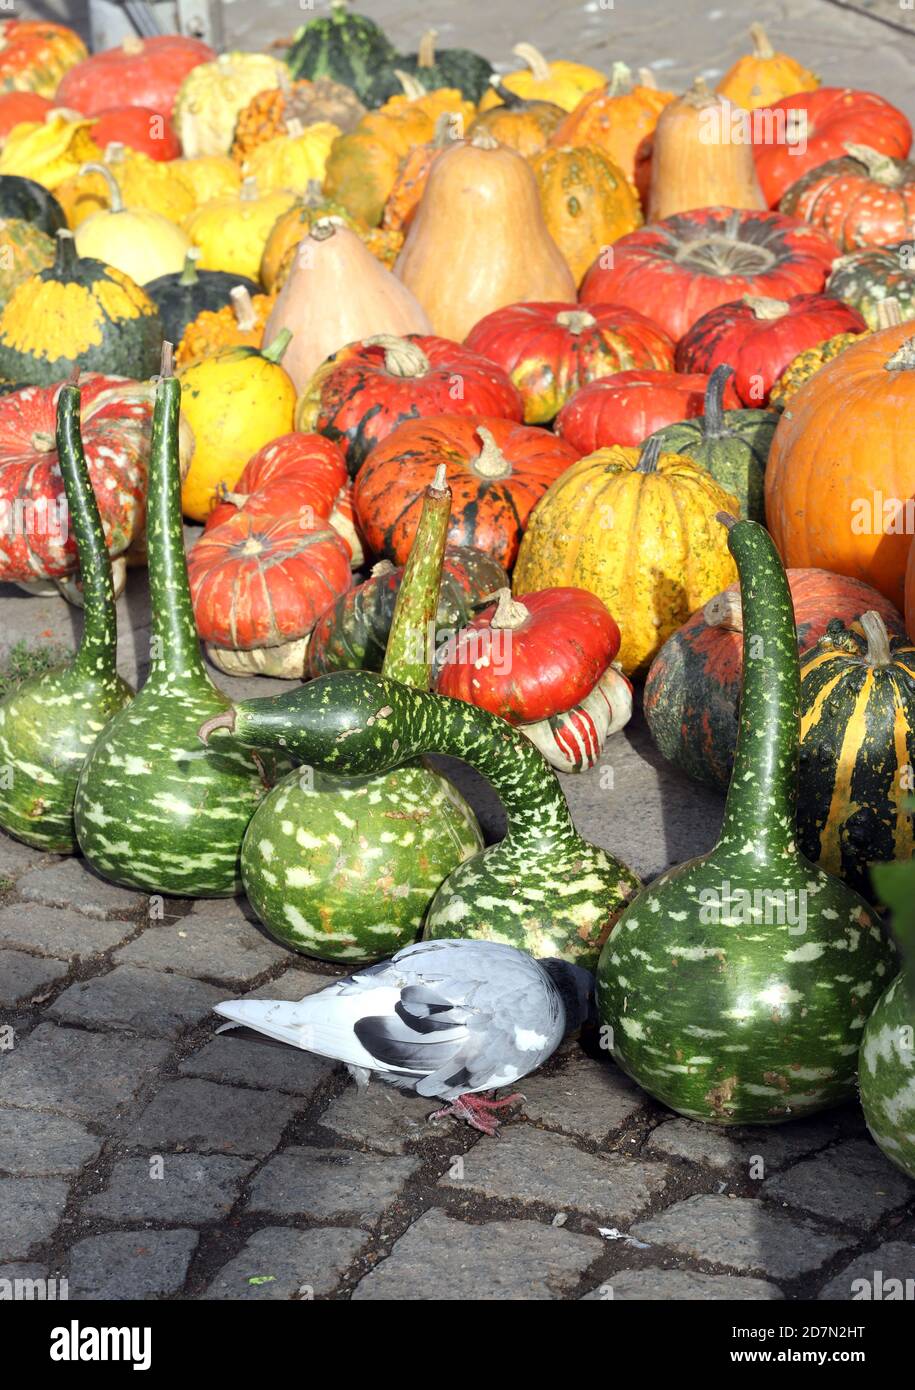 Colorful ornamental pumpkins, gourds and squashes in the street with pigeon, for Halloween holiday. Stock Photo